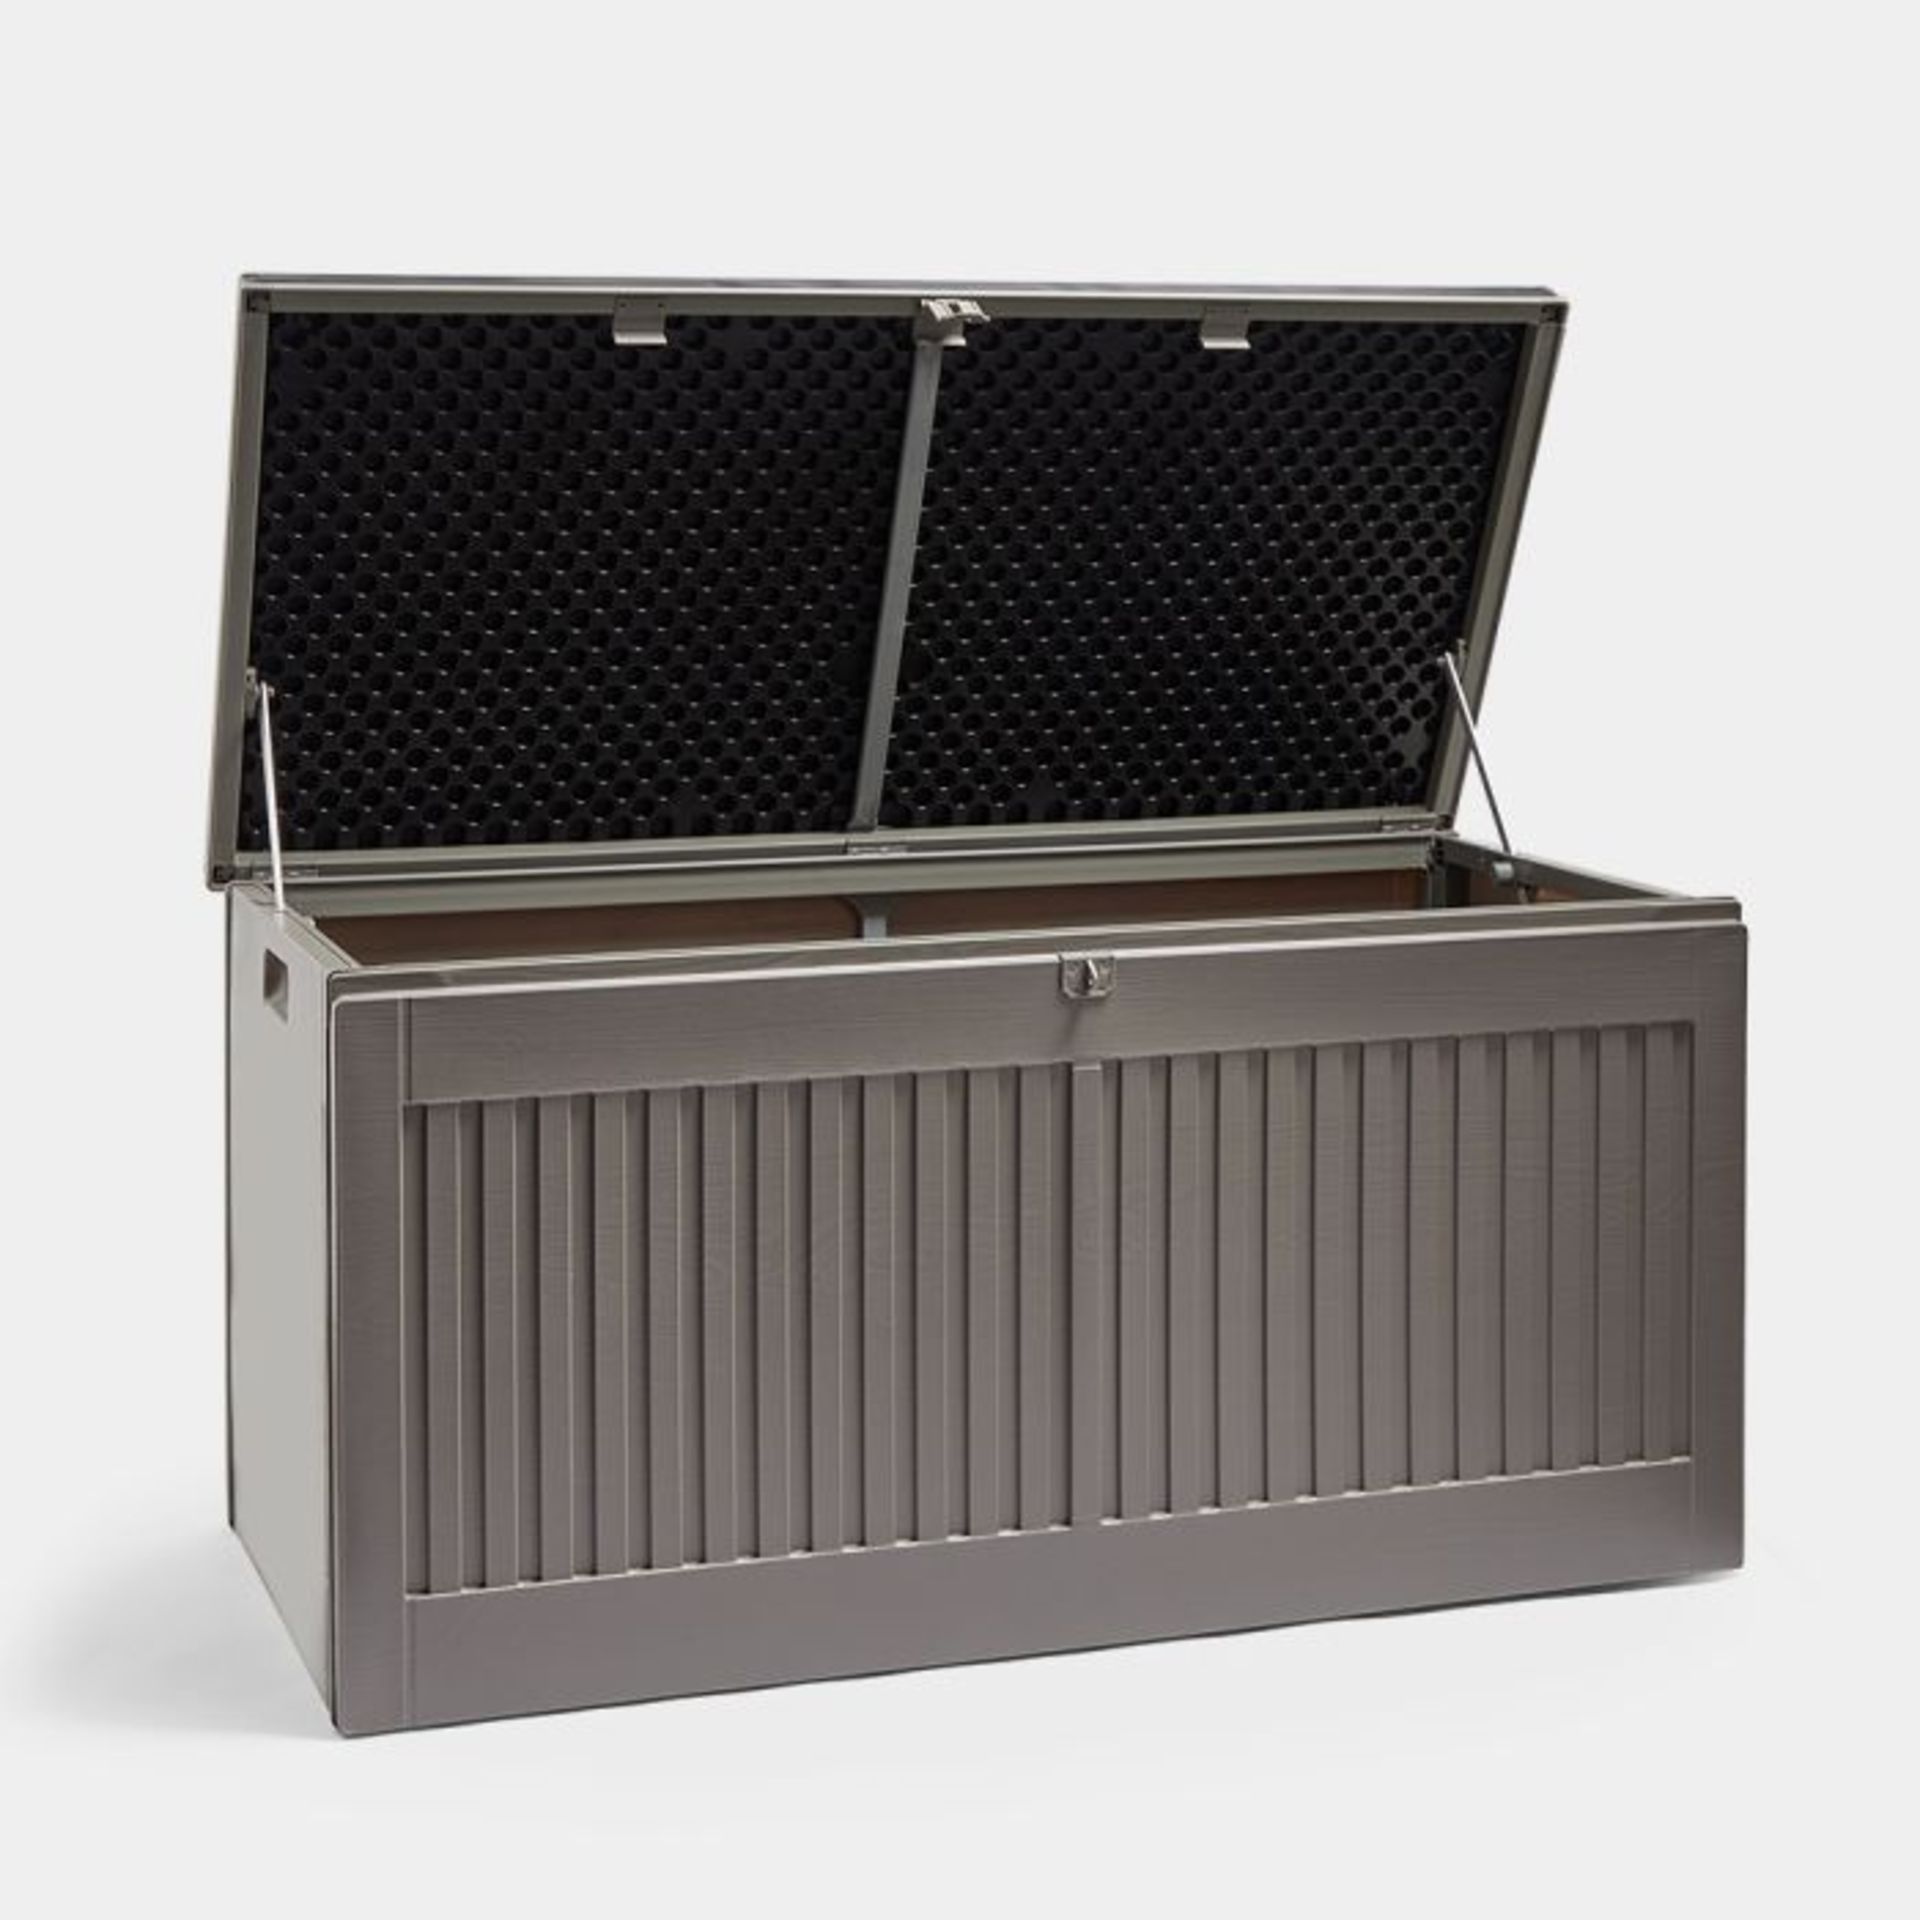 270L Plastic Outdoor Storage Box. - Er33. Slam-proof and smooth, easy access whilst avoiding trapped